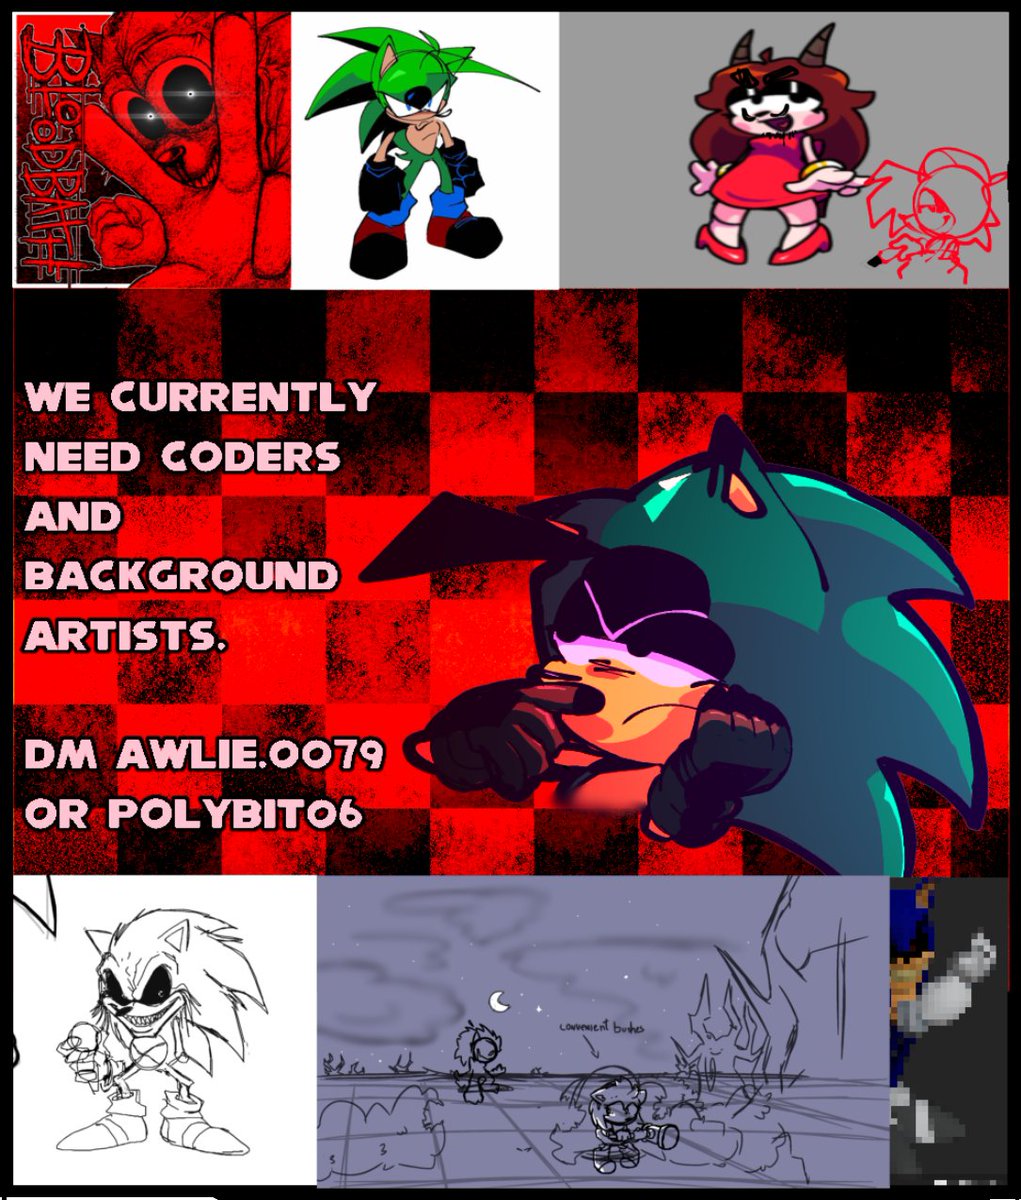 Hiii friends since Jade posted about it I will too

Excom team needs help

We're short on coders, and bg artists

If you guys wanna help out you can send examples either here or the discord tags in the image, and if you can't, boost

#sonicexefnf #fridaynightfunkin #sonicexe #FNF